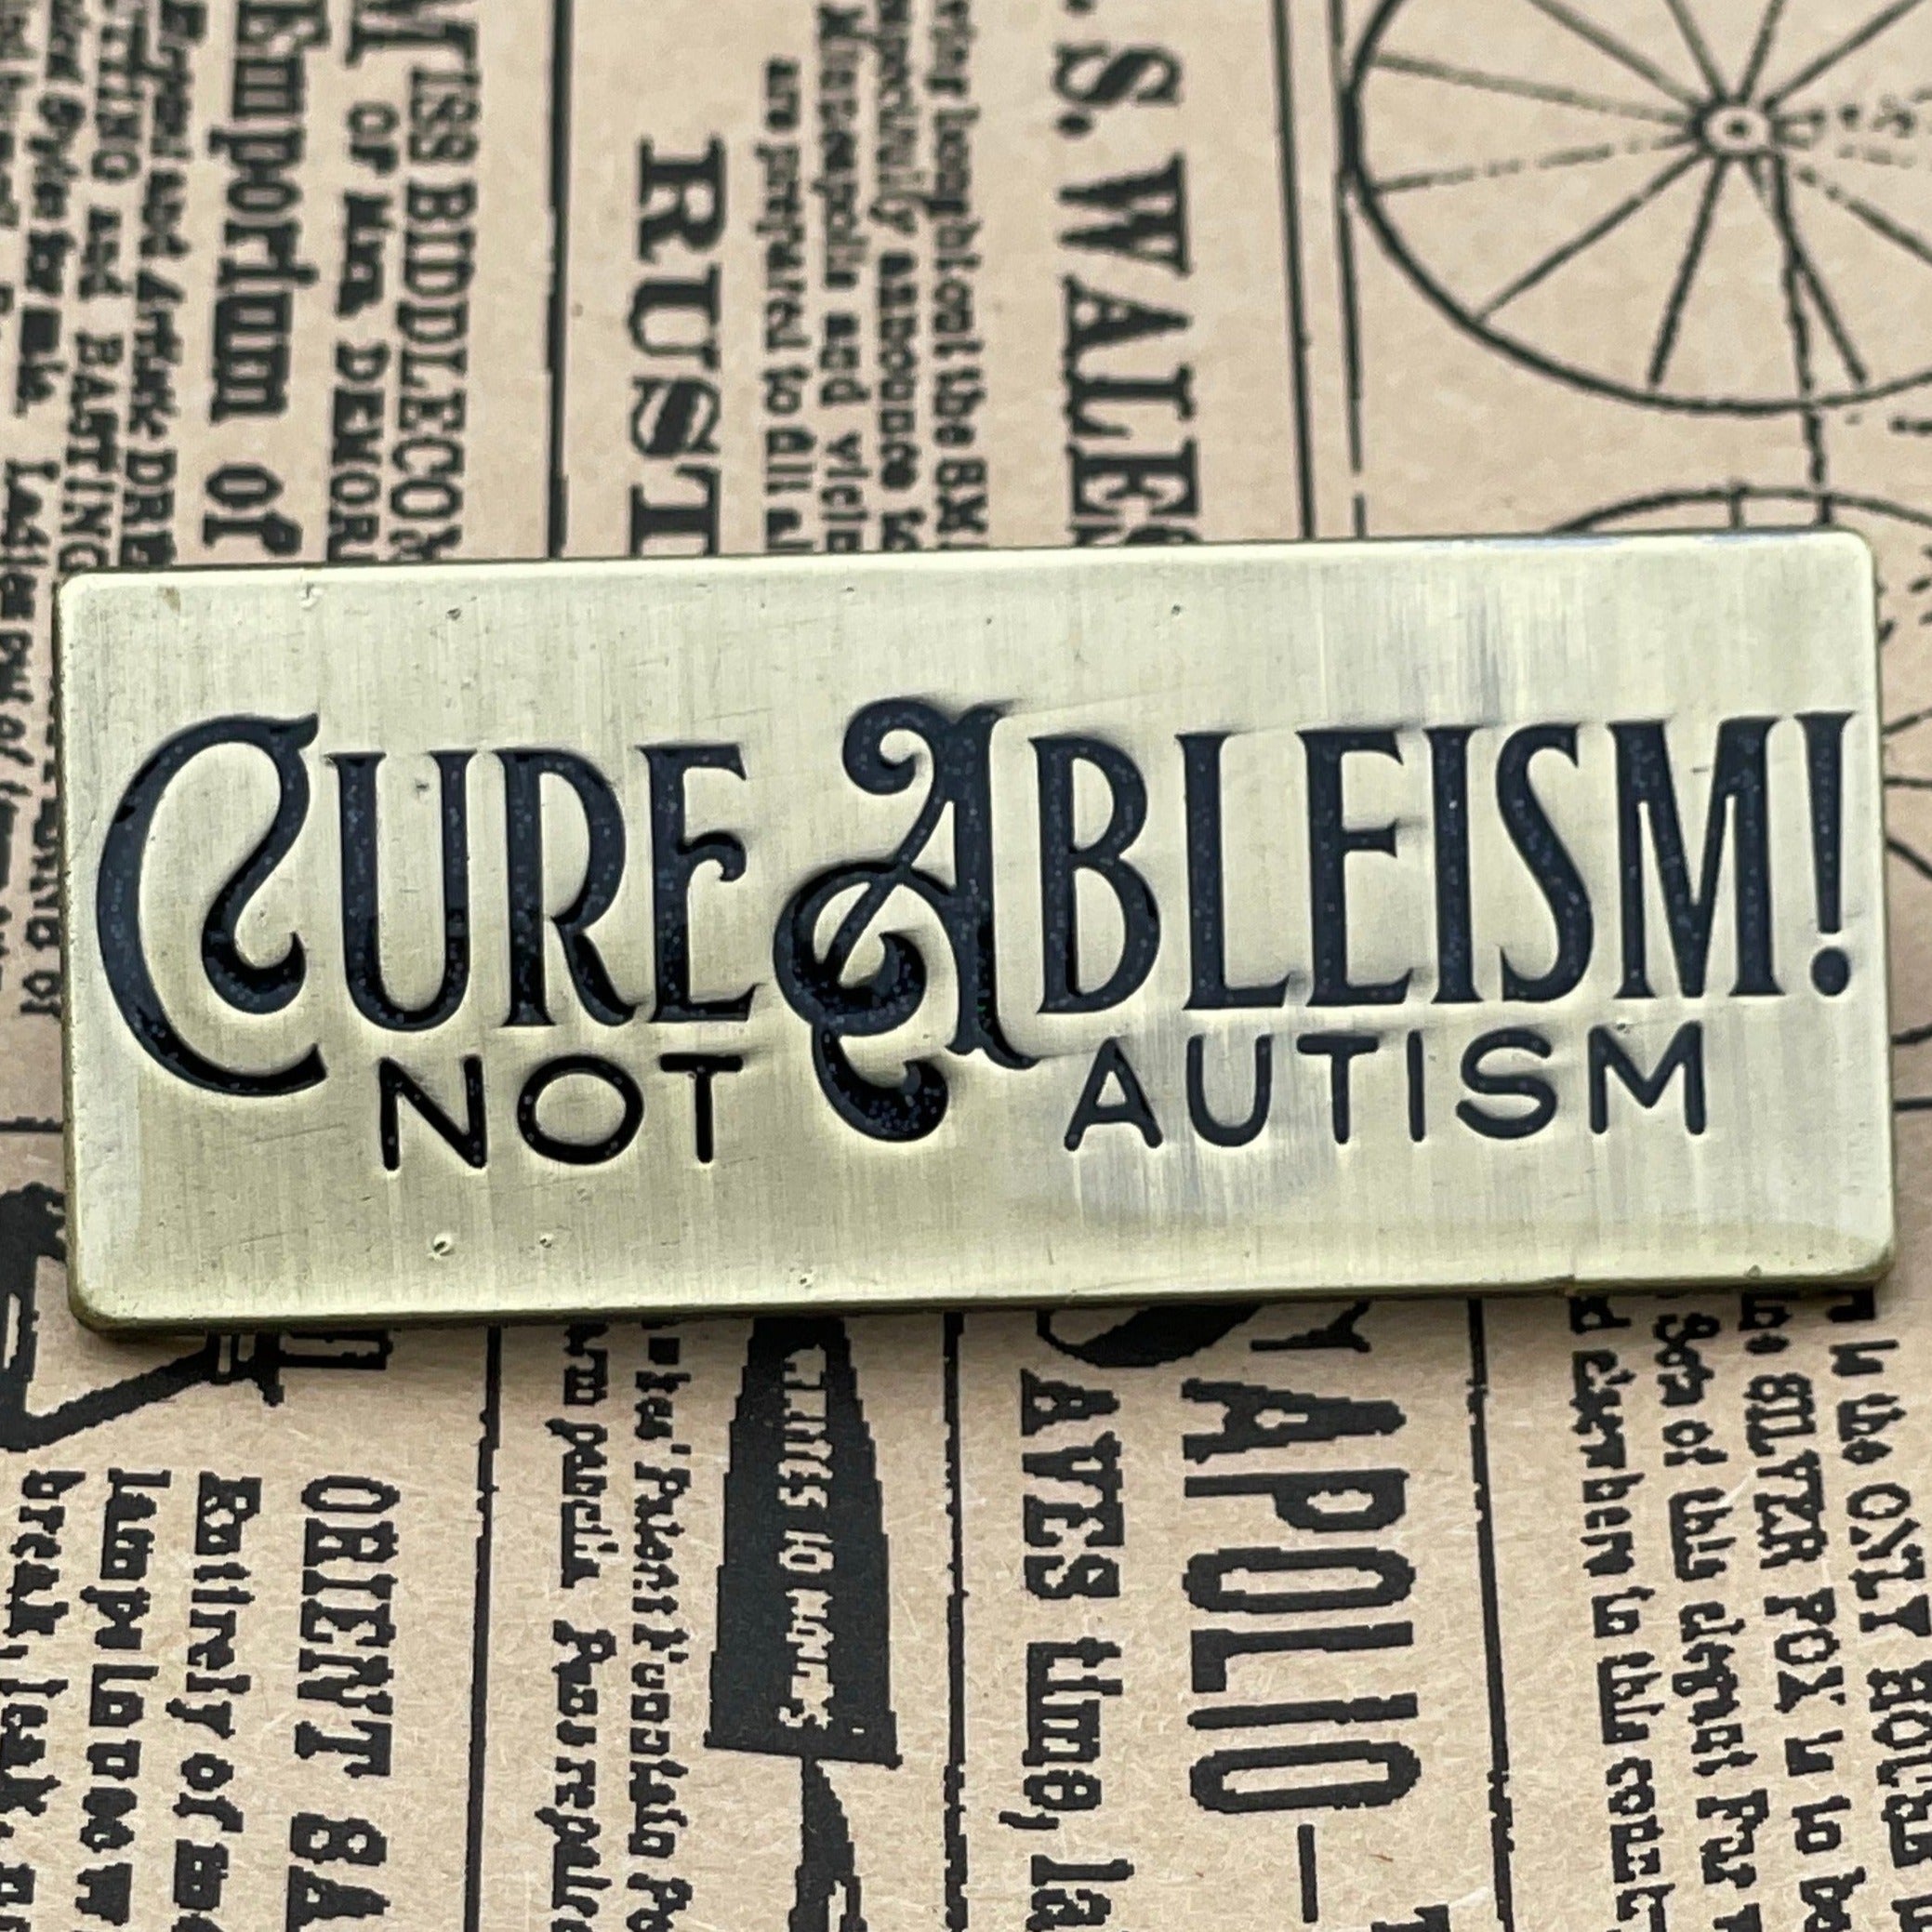 Cure Ableism! Not Autism Enamel Pin